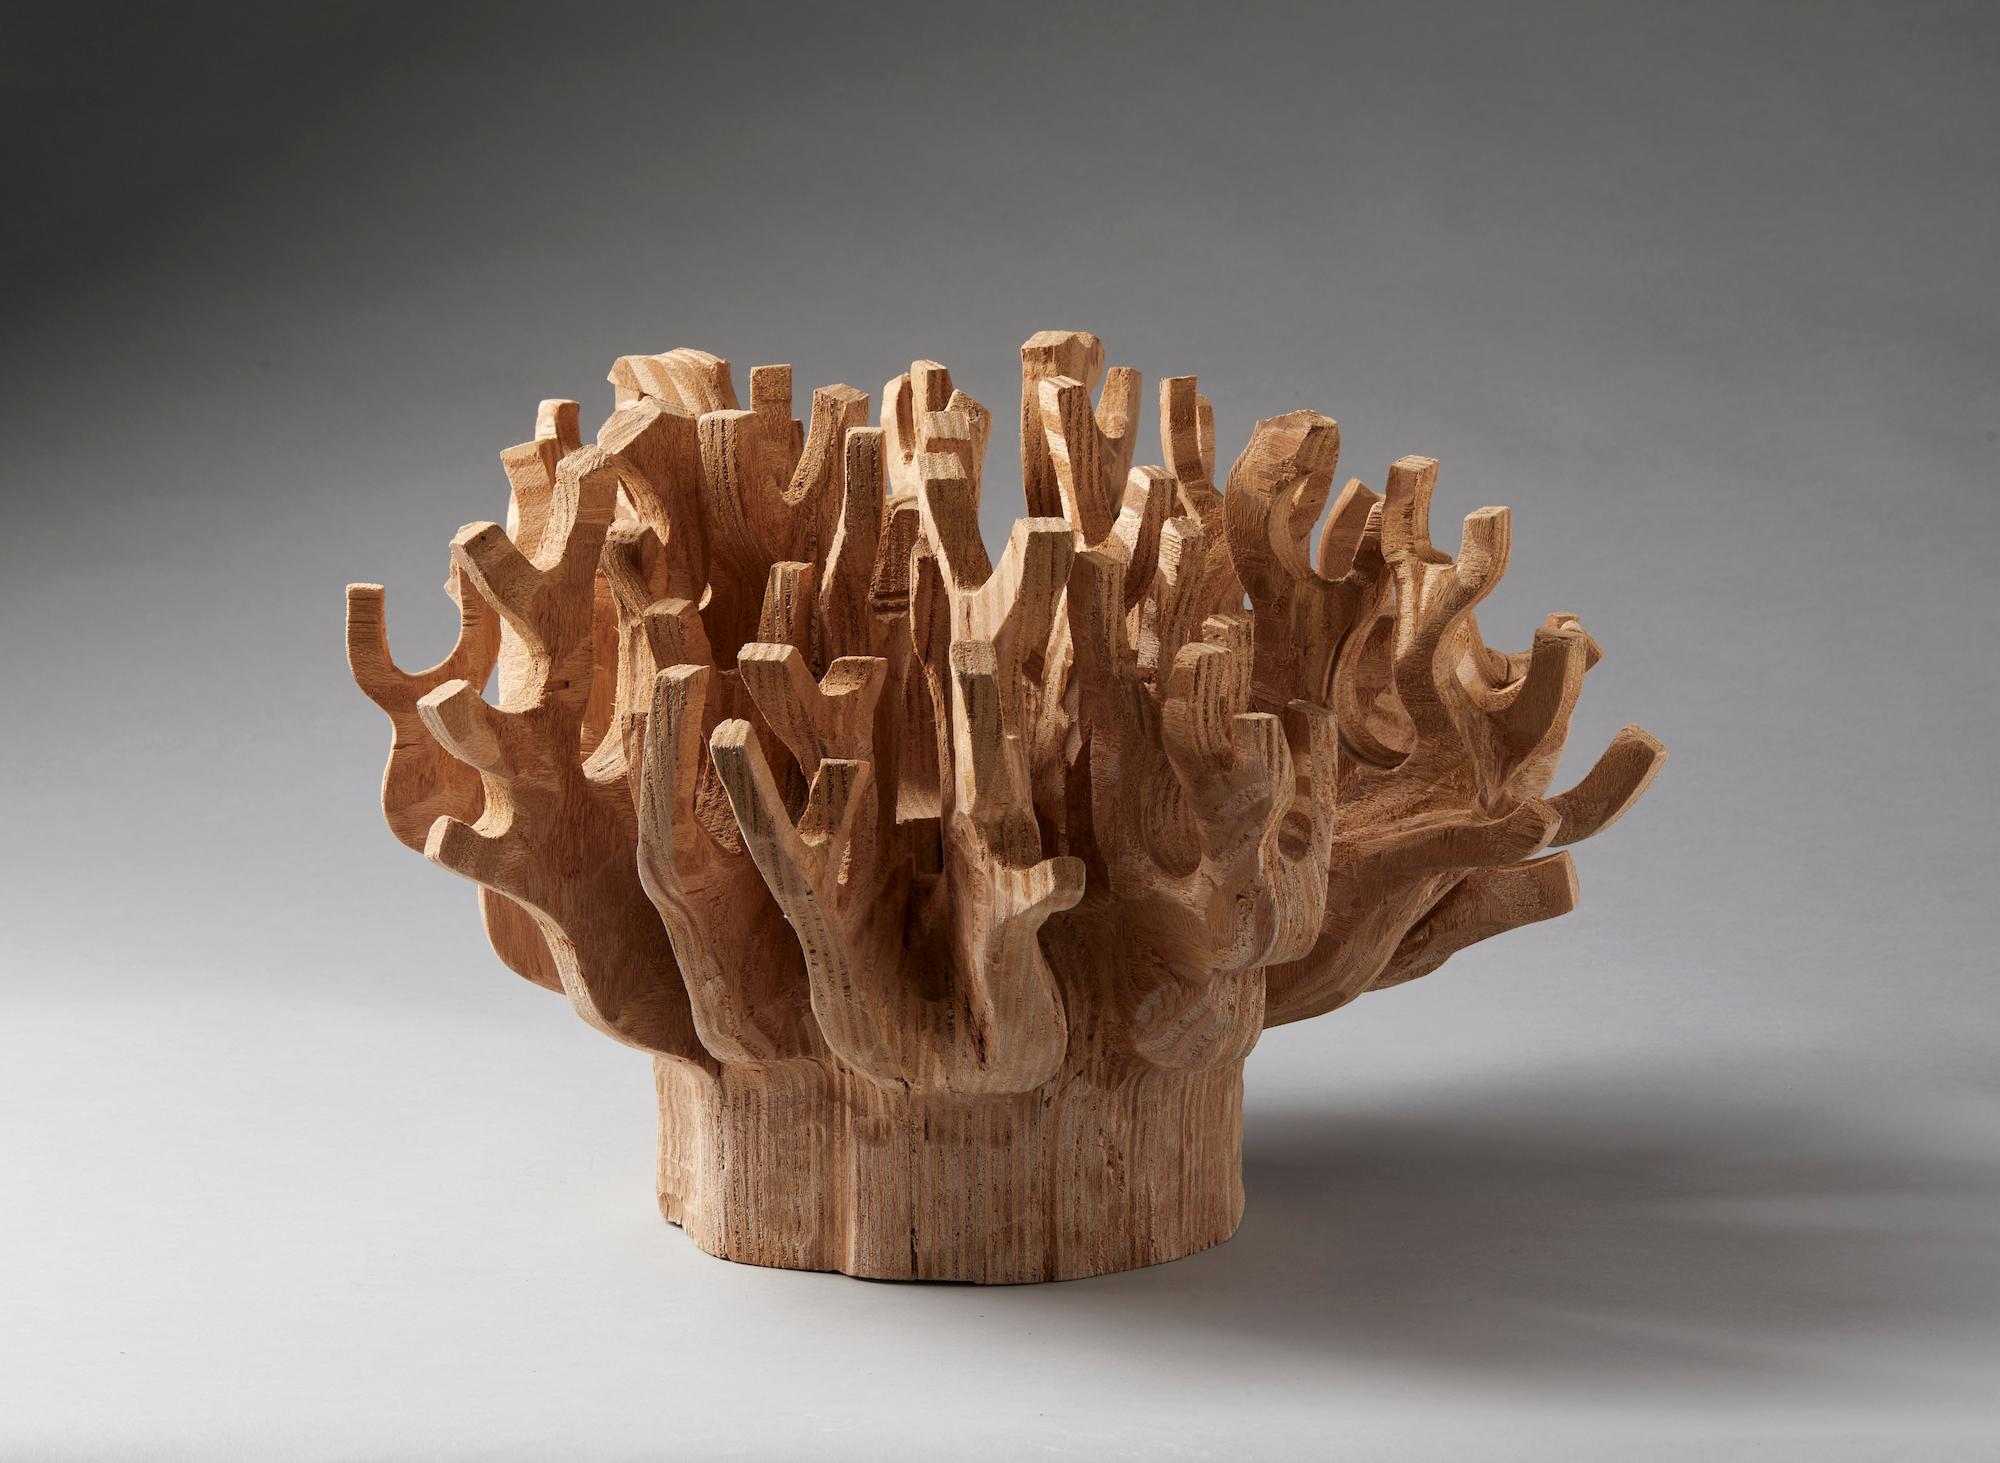 Giuseppe Rivadossi (Nave, July 8, 1935)

Coral, 2008
made of carved okumé plywood
on a wooden base also by Maestro Giuseppe Rivadossi

Size:
height 35 x 50 x 54 cm
base: 110 x 28.5


Giuseppe Rivadossi
Having inherited an interest in art from his